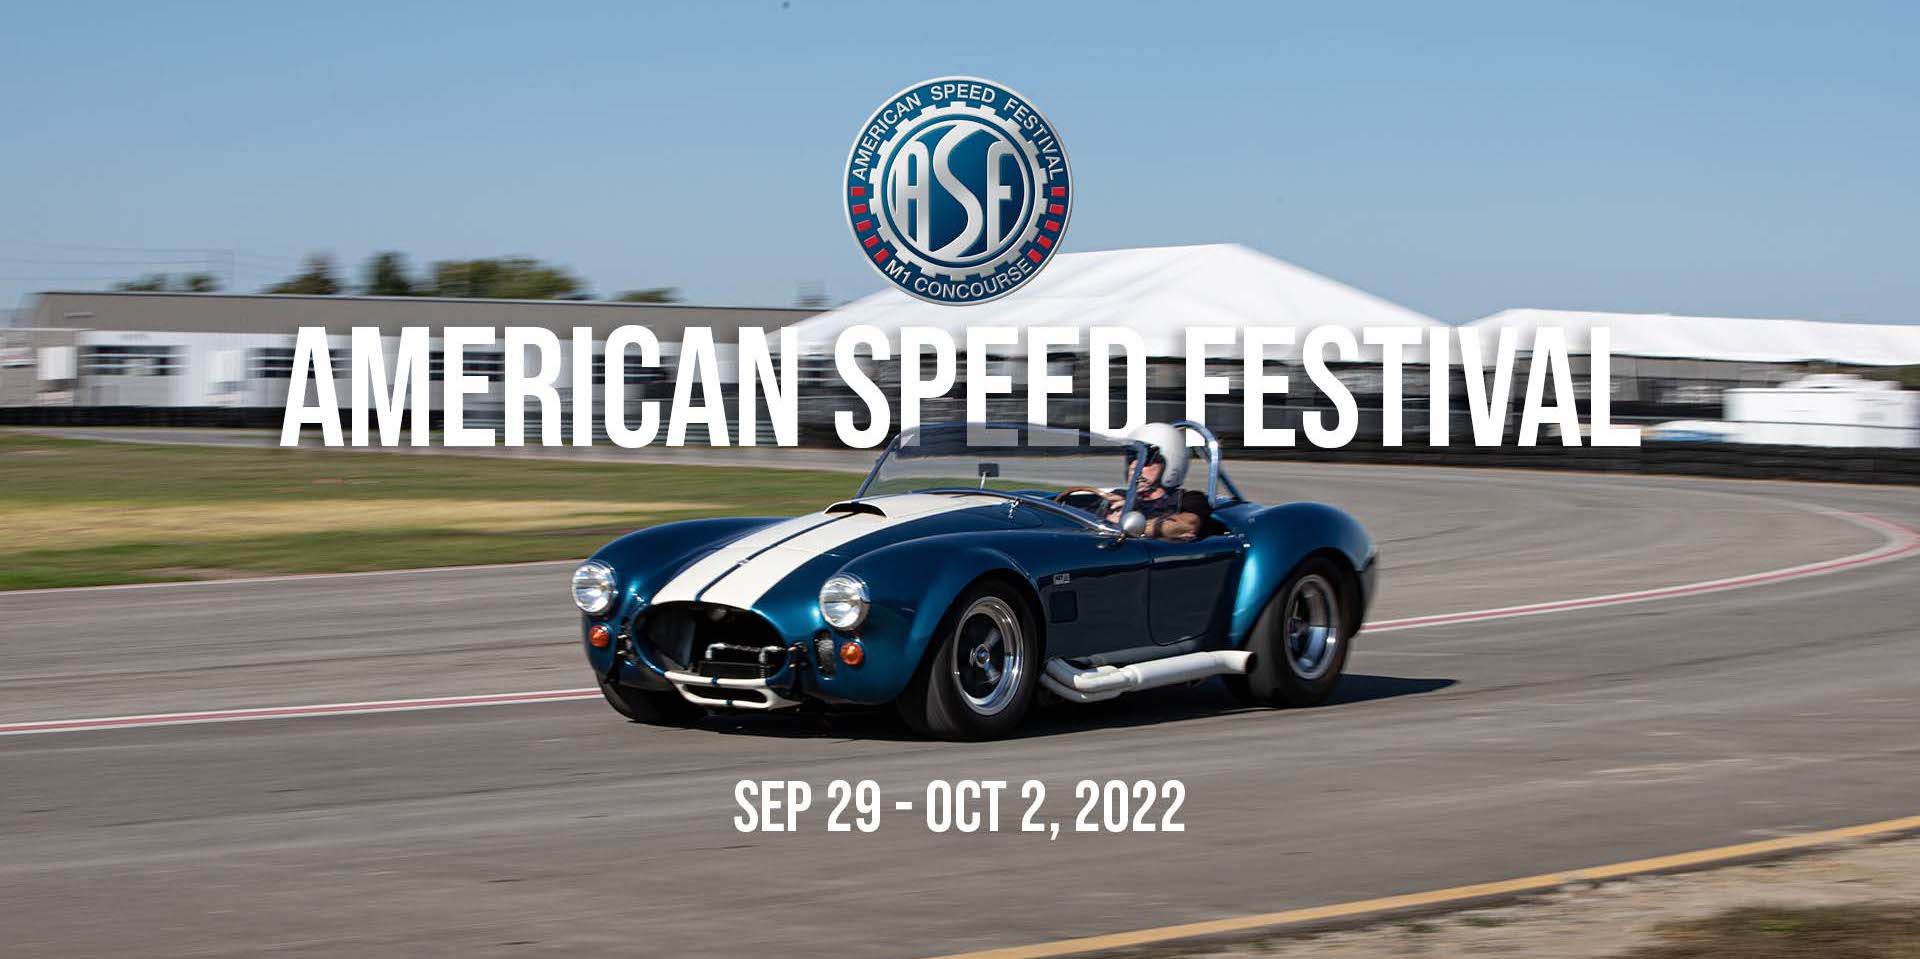 American Speed Festival 2022 promotional image